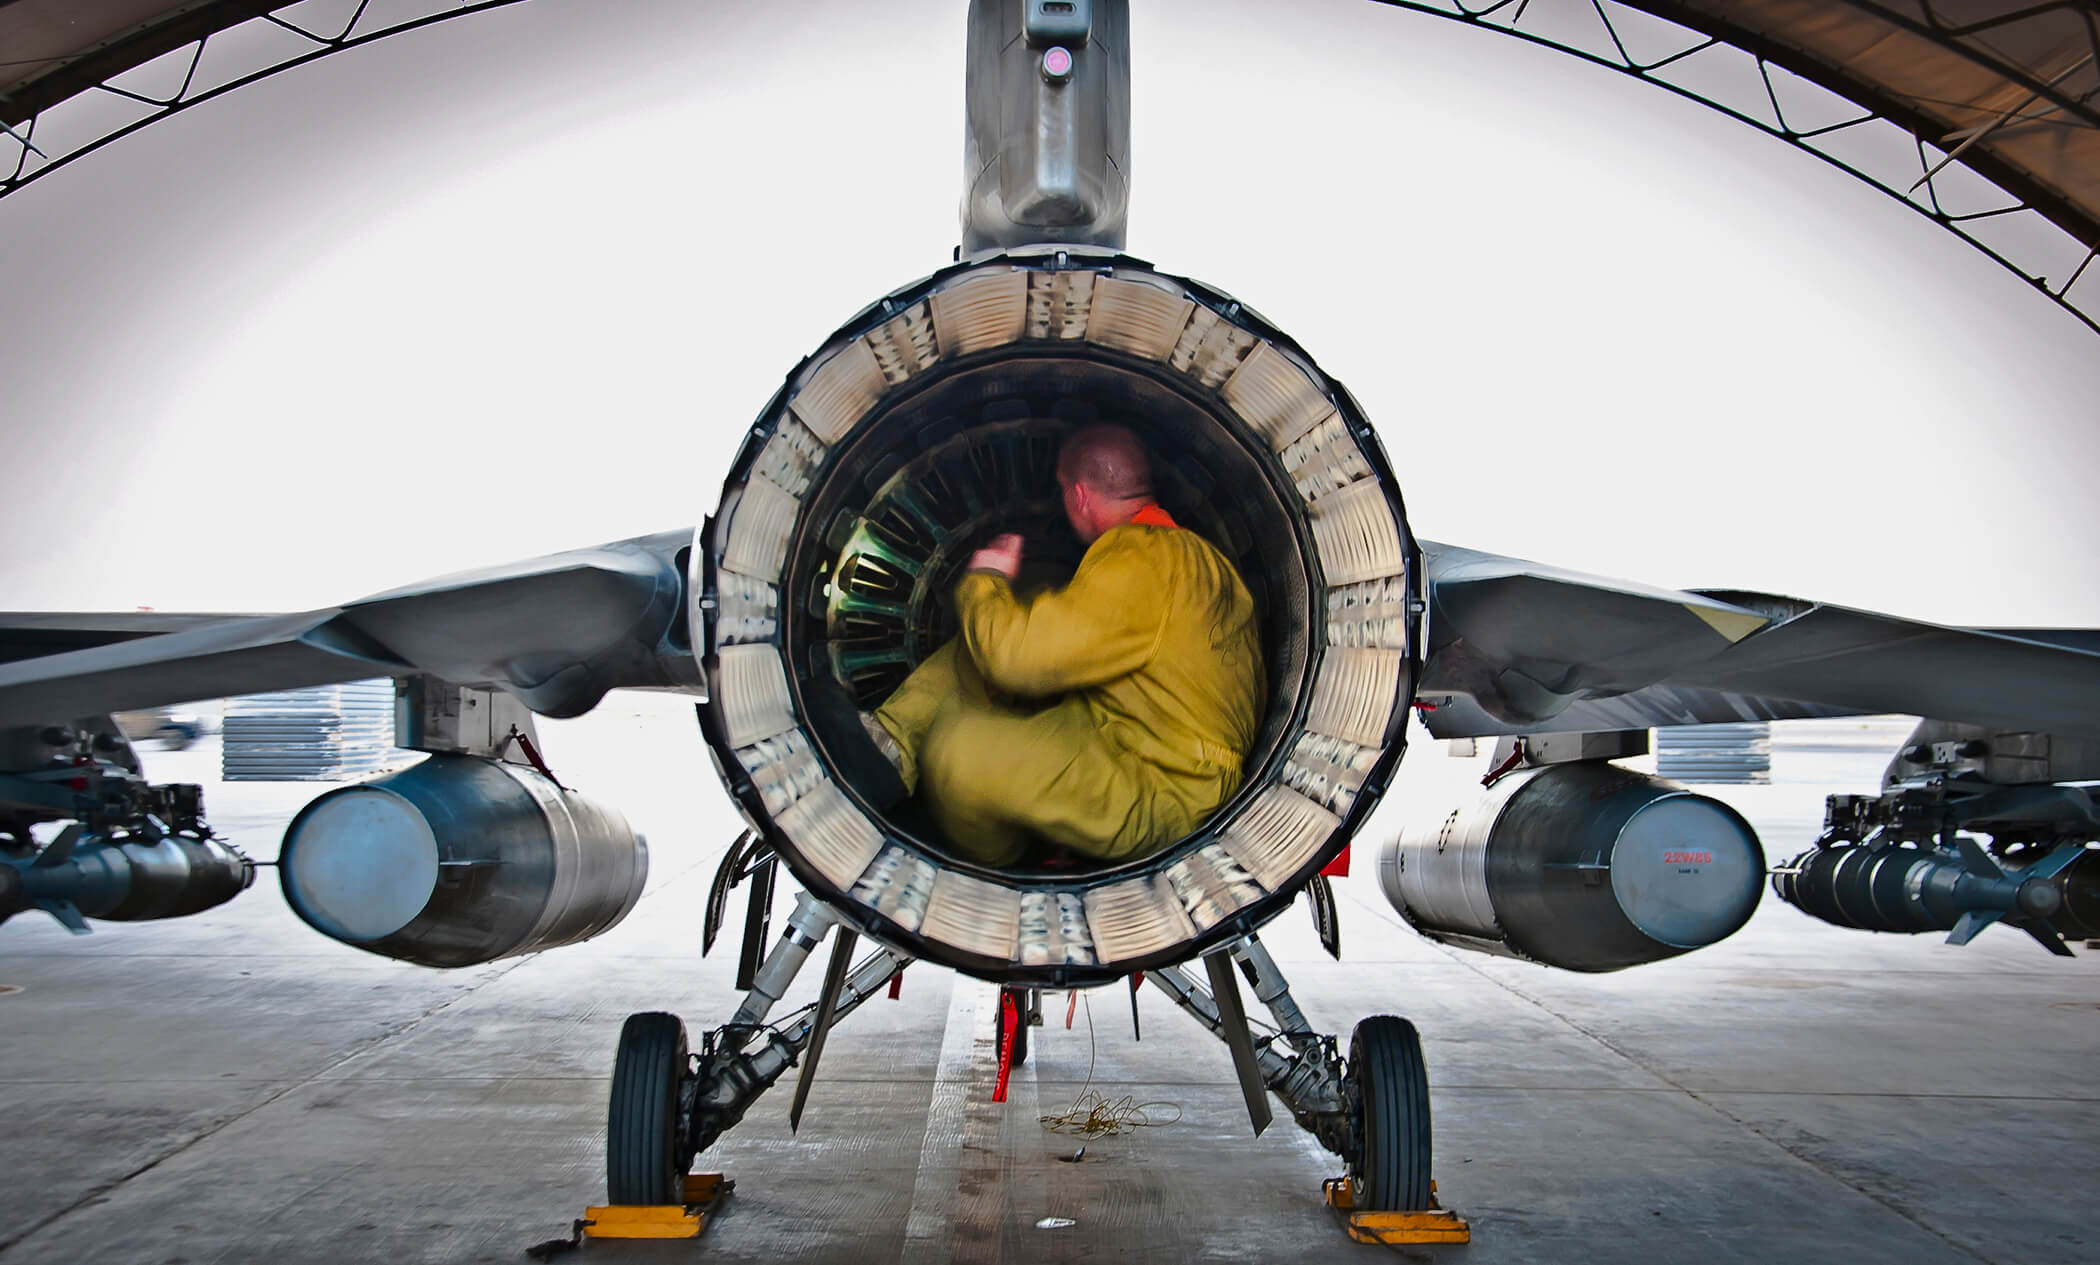 airman inspecting engine of fighter aircraft